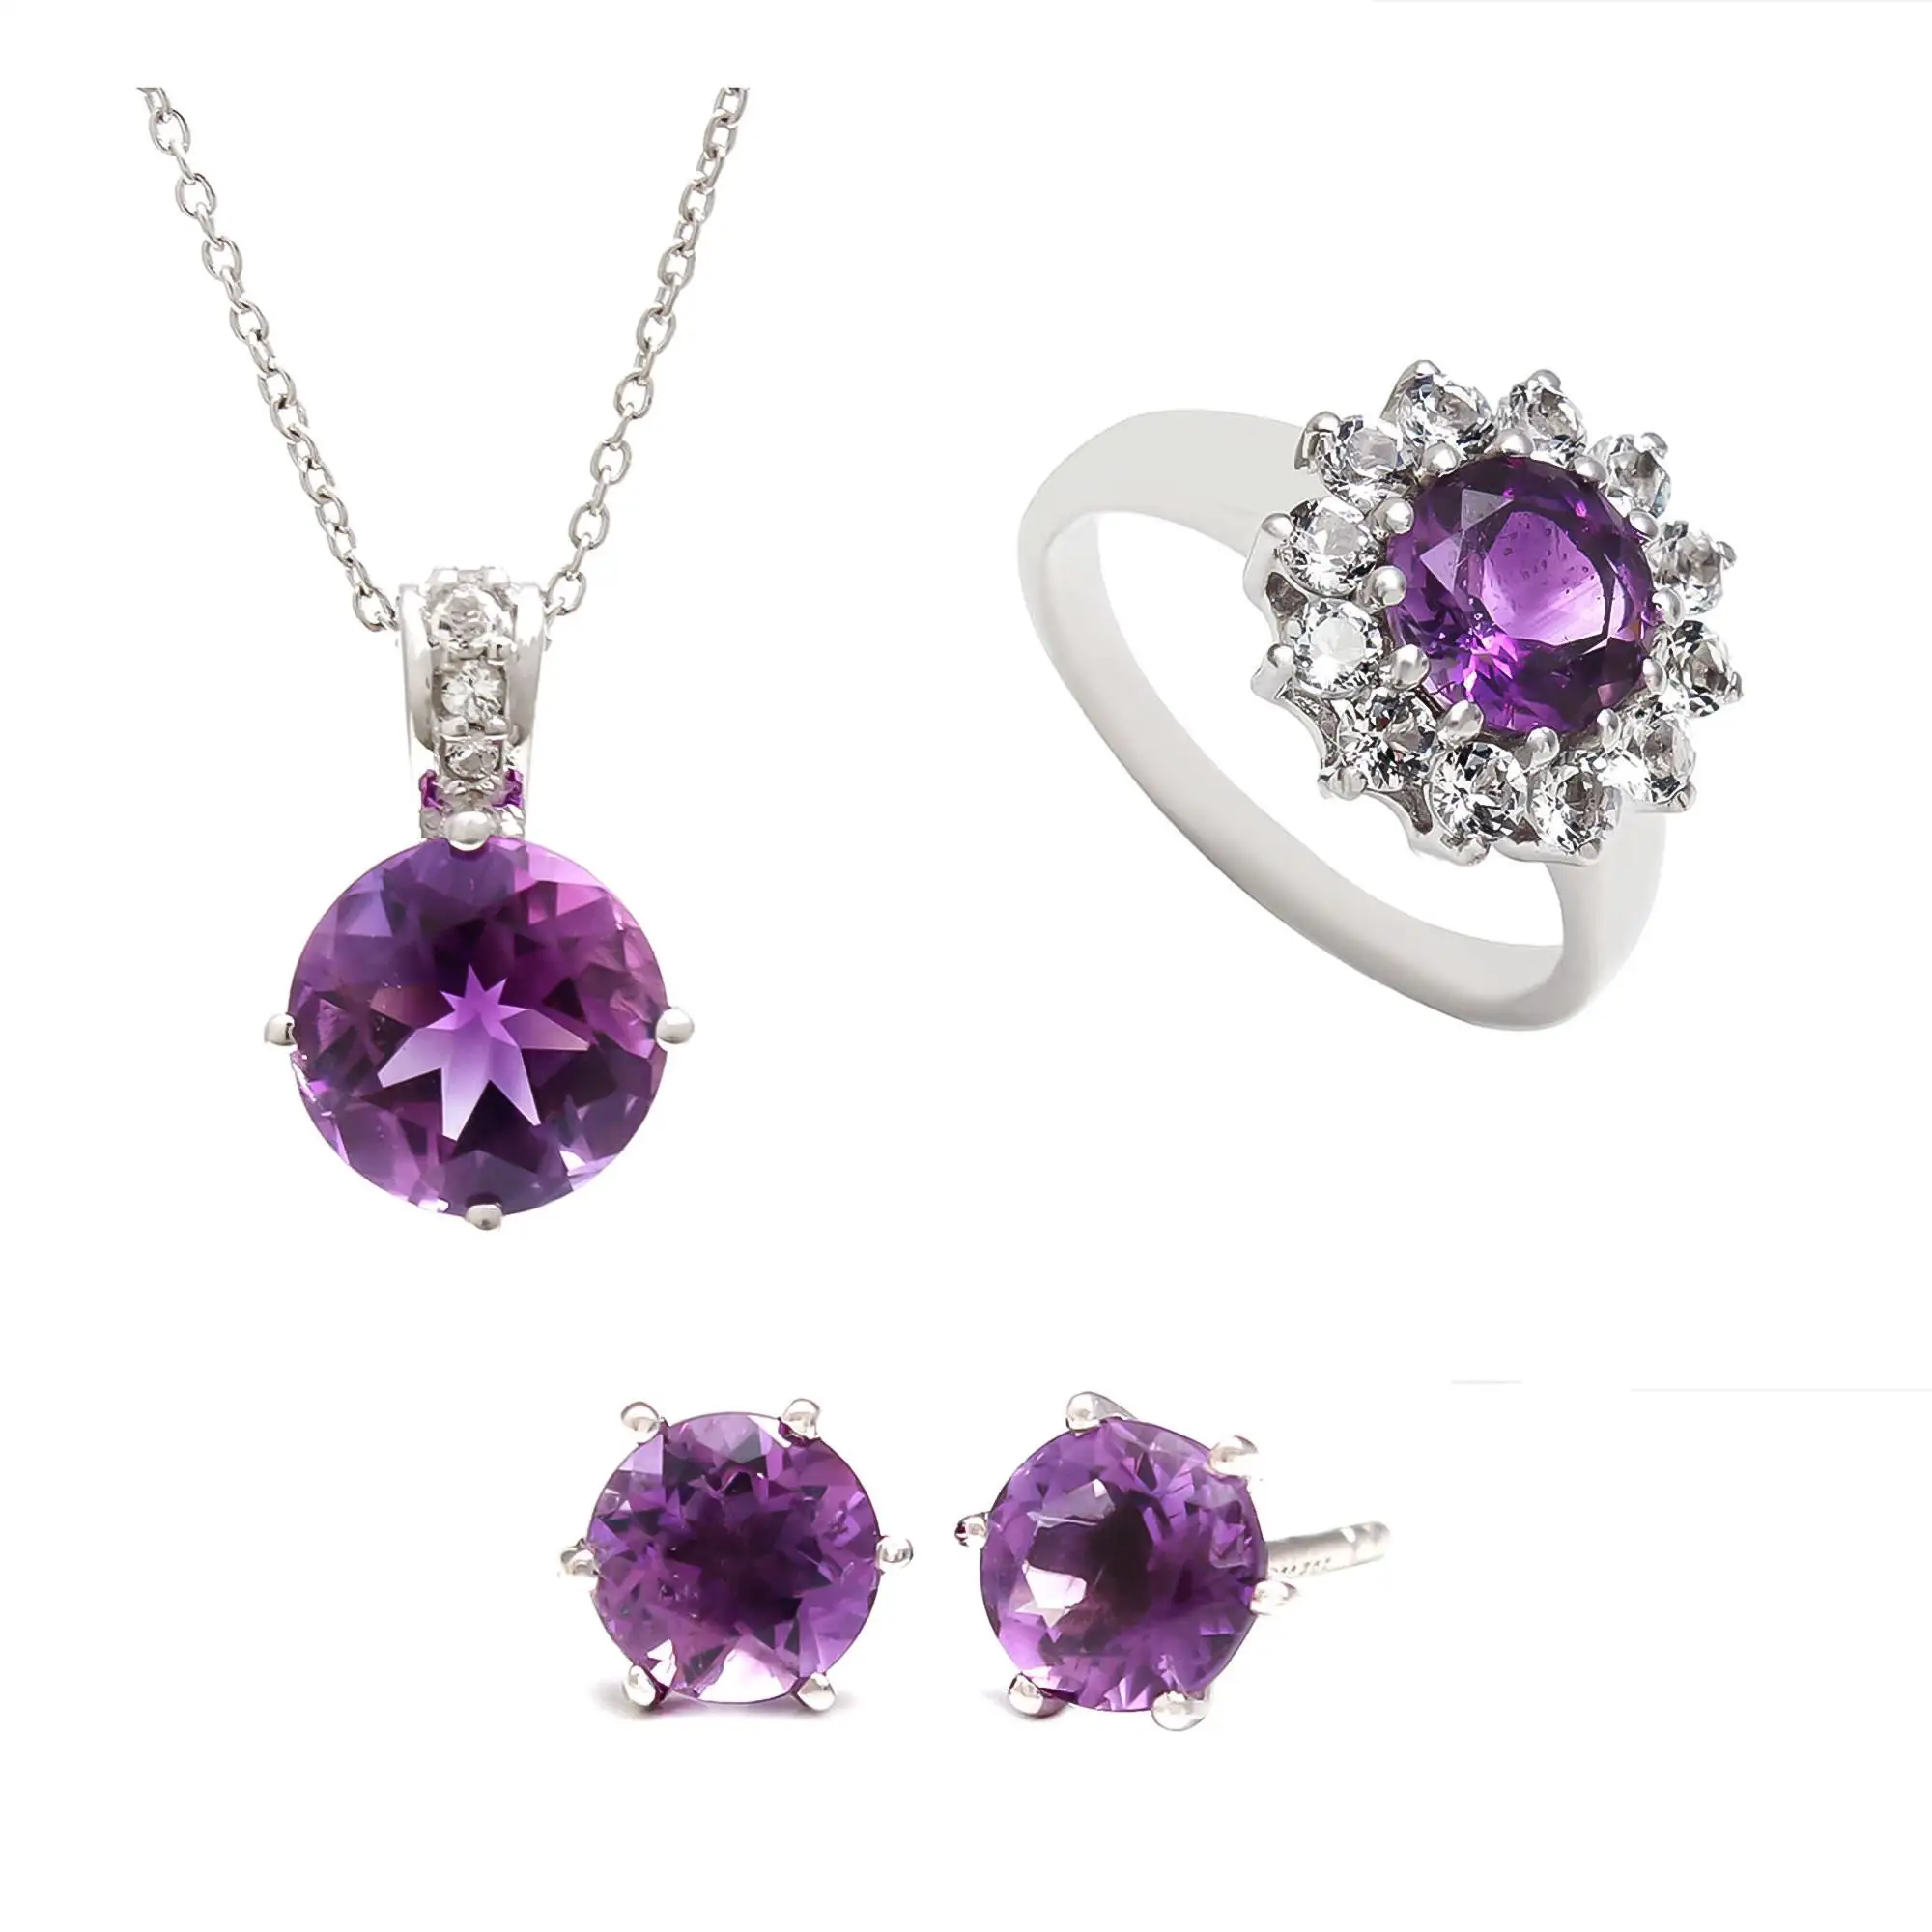 Natural Gemstone Amethyst 925 Sterling Silver Ring Earrings Pendant Necklace Wholesaler 925 Sterling Silver Fine Jewelry Sets